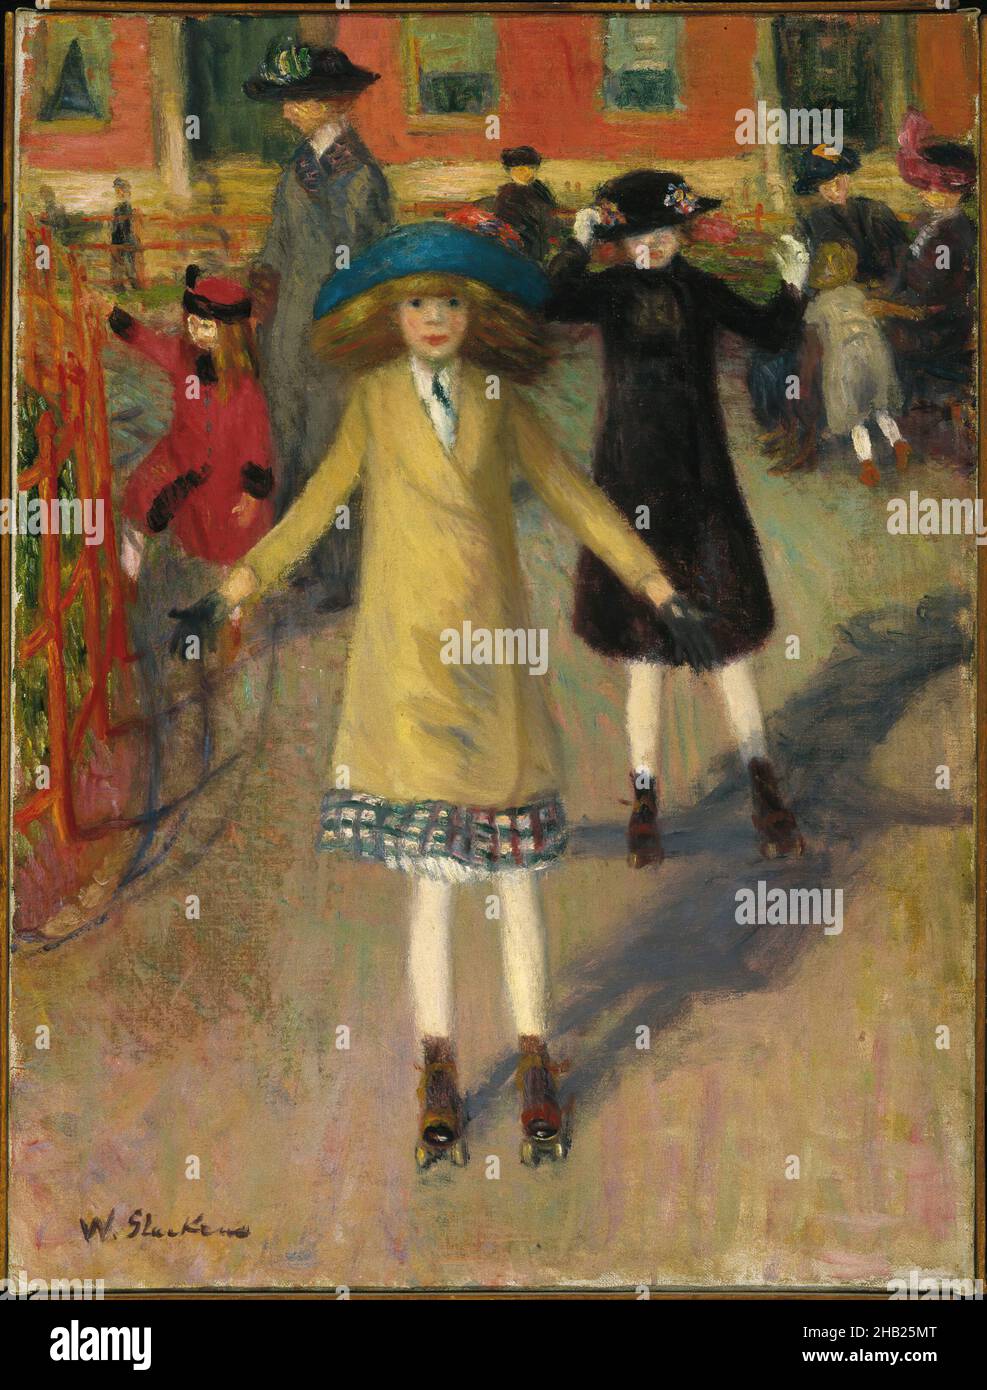 Children Rollerskating, William Glackens, American, 1870-1938, Oil on canvas, ca. 1912-14, 23 3/4 x 17 15/16 in., 60.3 x 45.6 cm, 20th, 20thC, American oil, Century, childhood, children, early 20th century art, female, female figures, fun, girls, impressionist, leisure,fashion, life, lifestyle, ndd12, painting, red, rollerstaking, shadows, sports, yellow Stock Photo